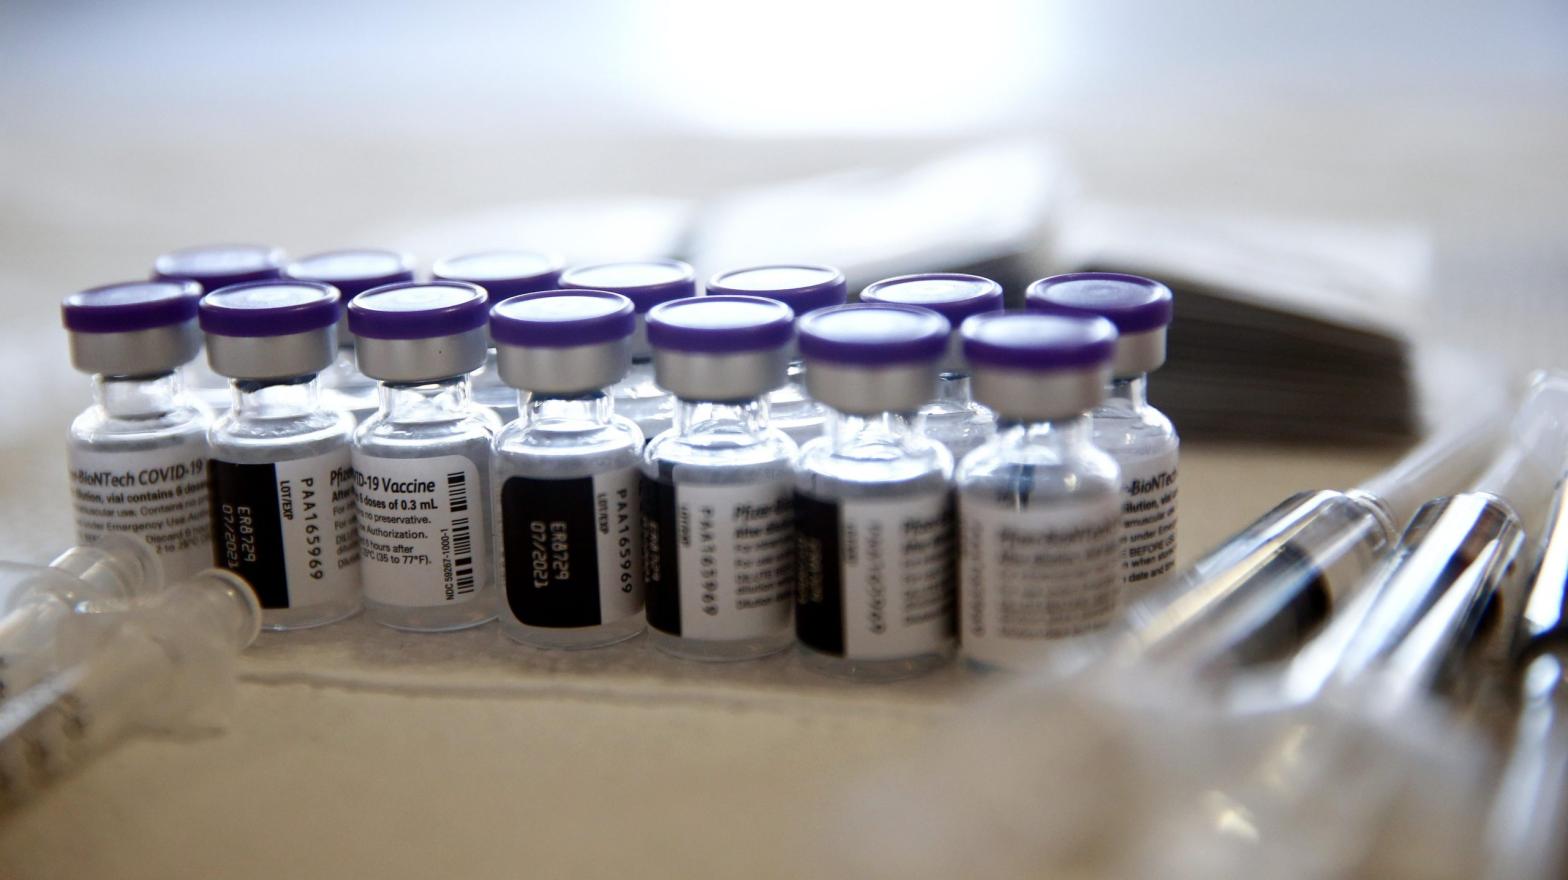 Vials containing doses of the Pfizer COVID-19 vaccine are viewed at a clinic targeting minority community members at St. Patrick's Catholic Church on April 9, 2021 in Los Angeles, California.  (Photo: Mario Tama, Getty Images)